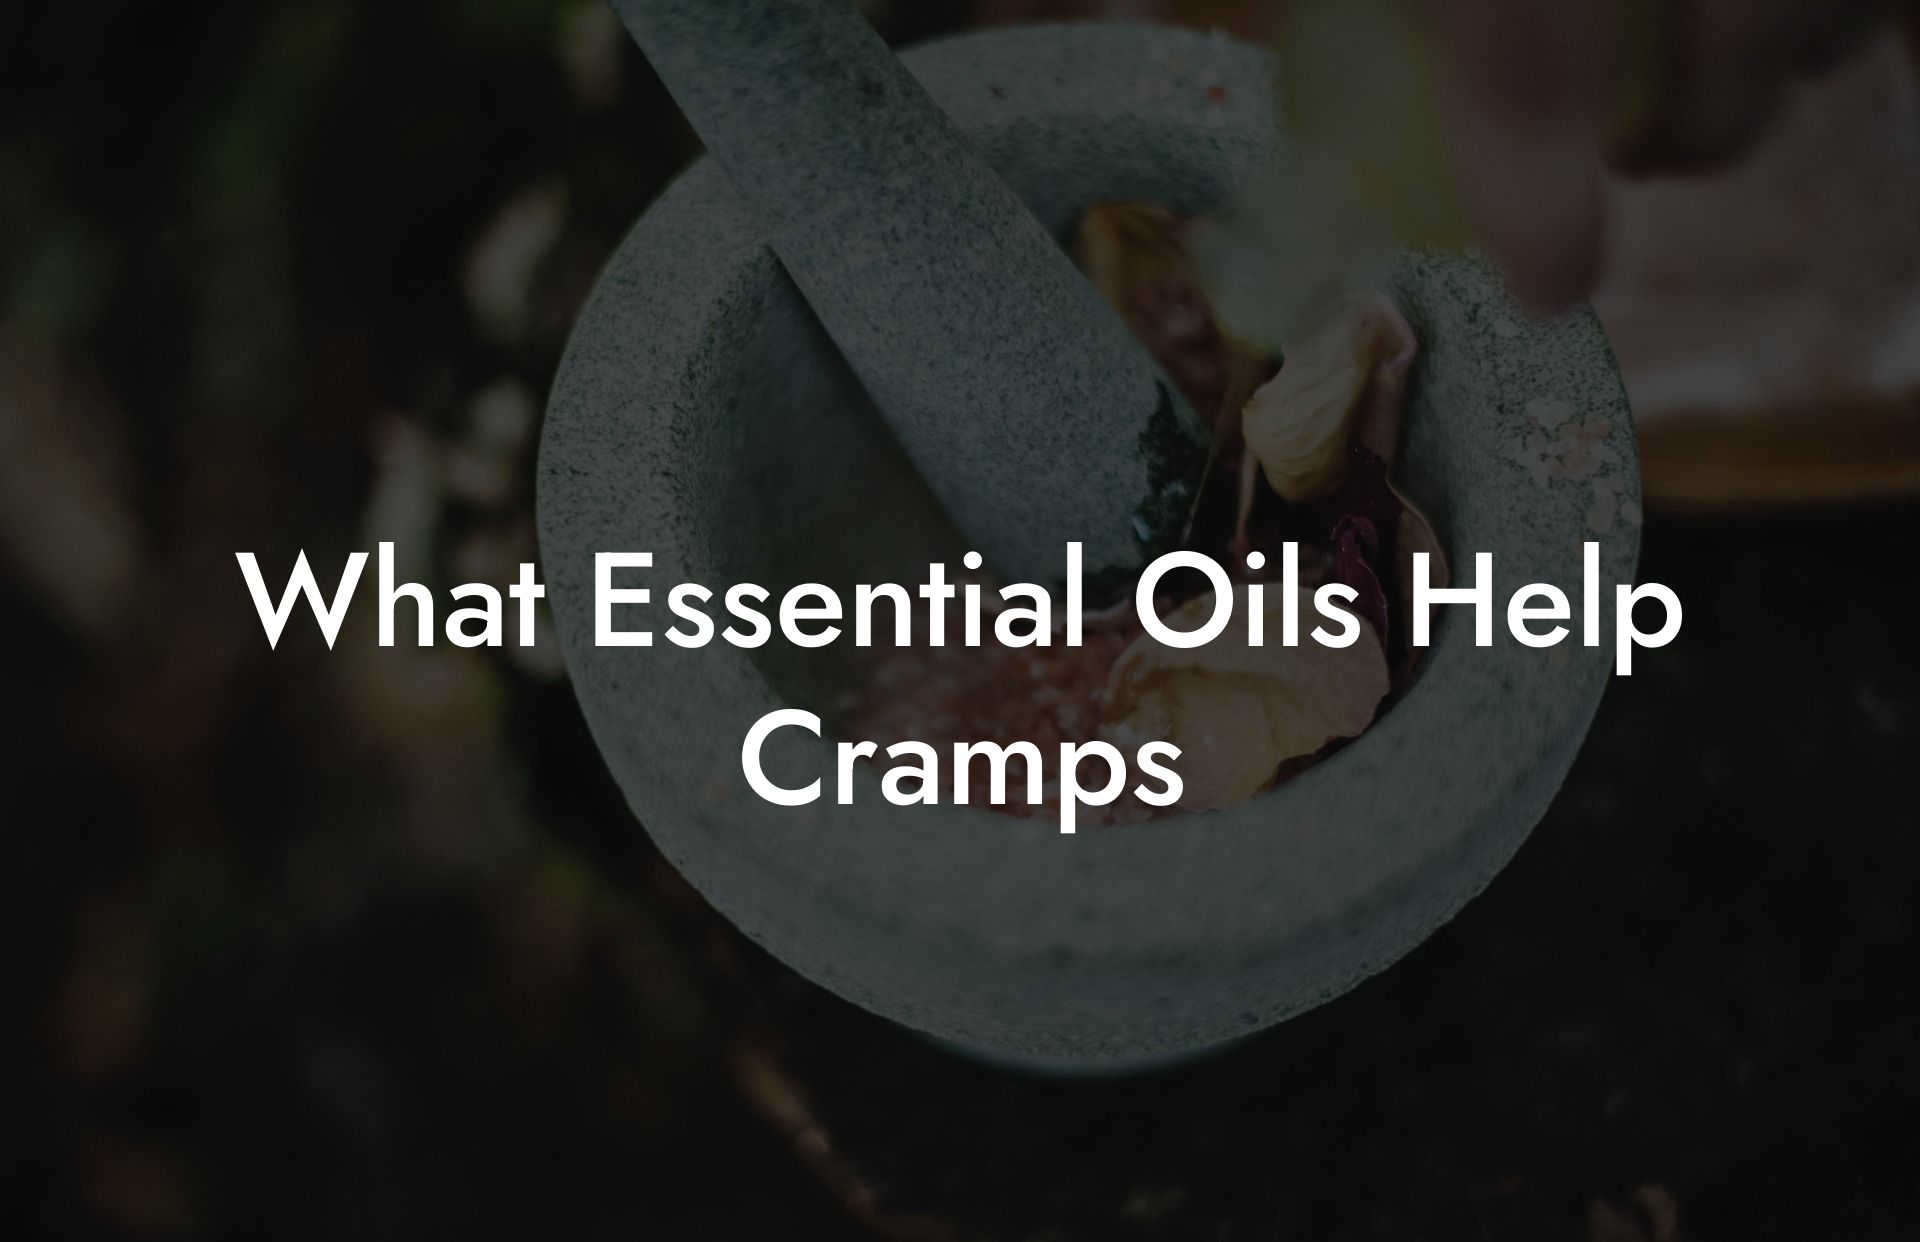 What Essential Oils Help Cramps